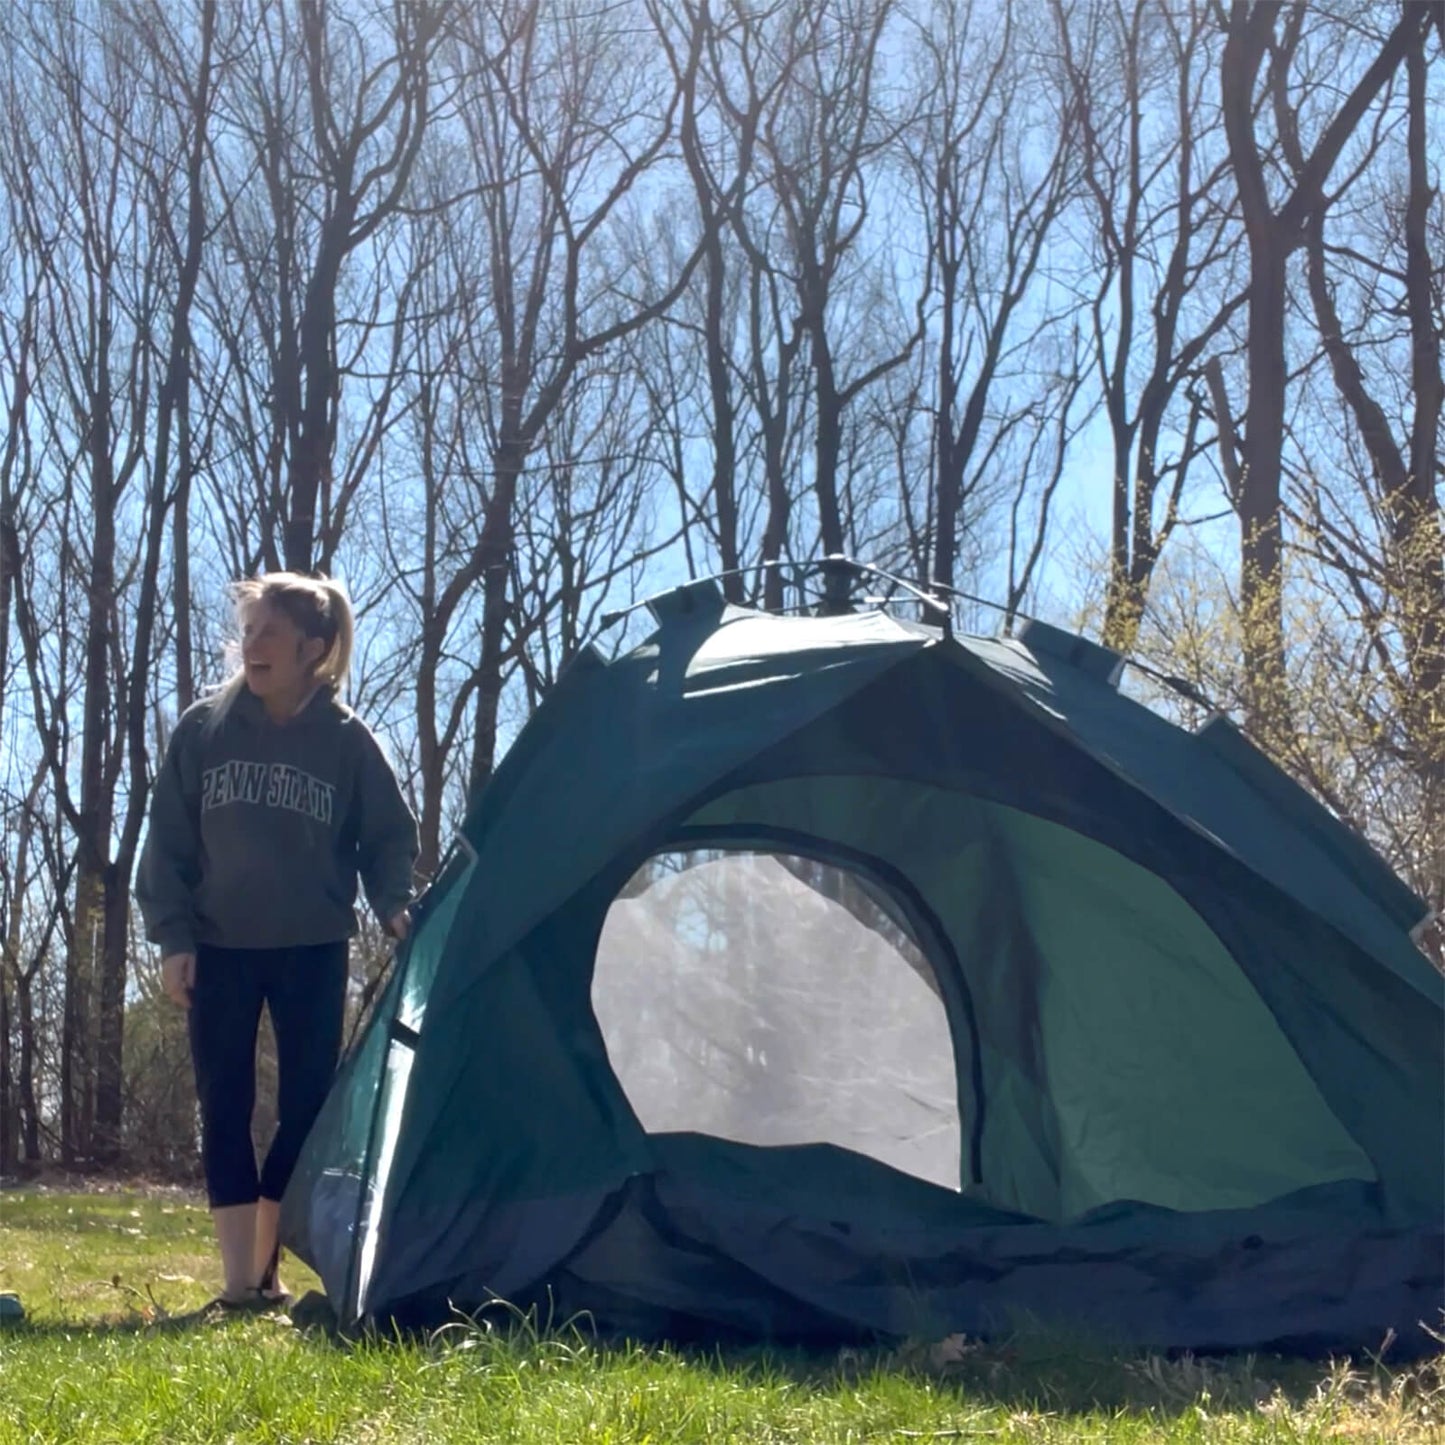 1 Small-Sized + 1 Large-Sized 3Secs Tent (Family Package, AU) + Free Camping Checklist